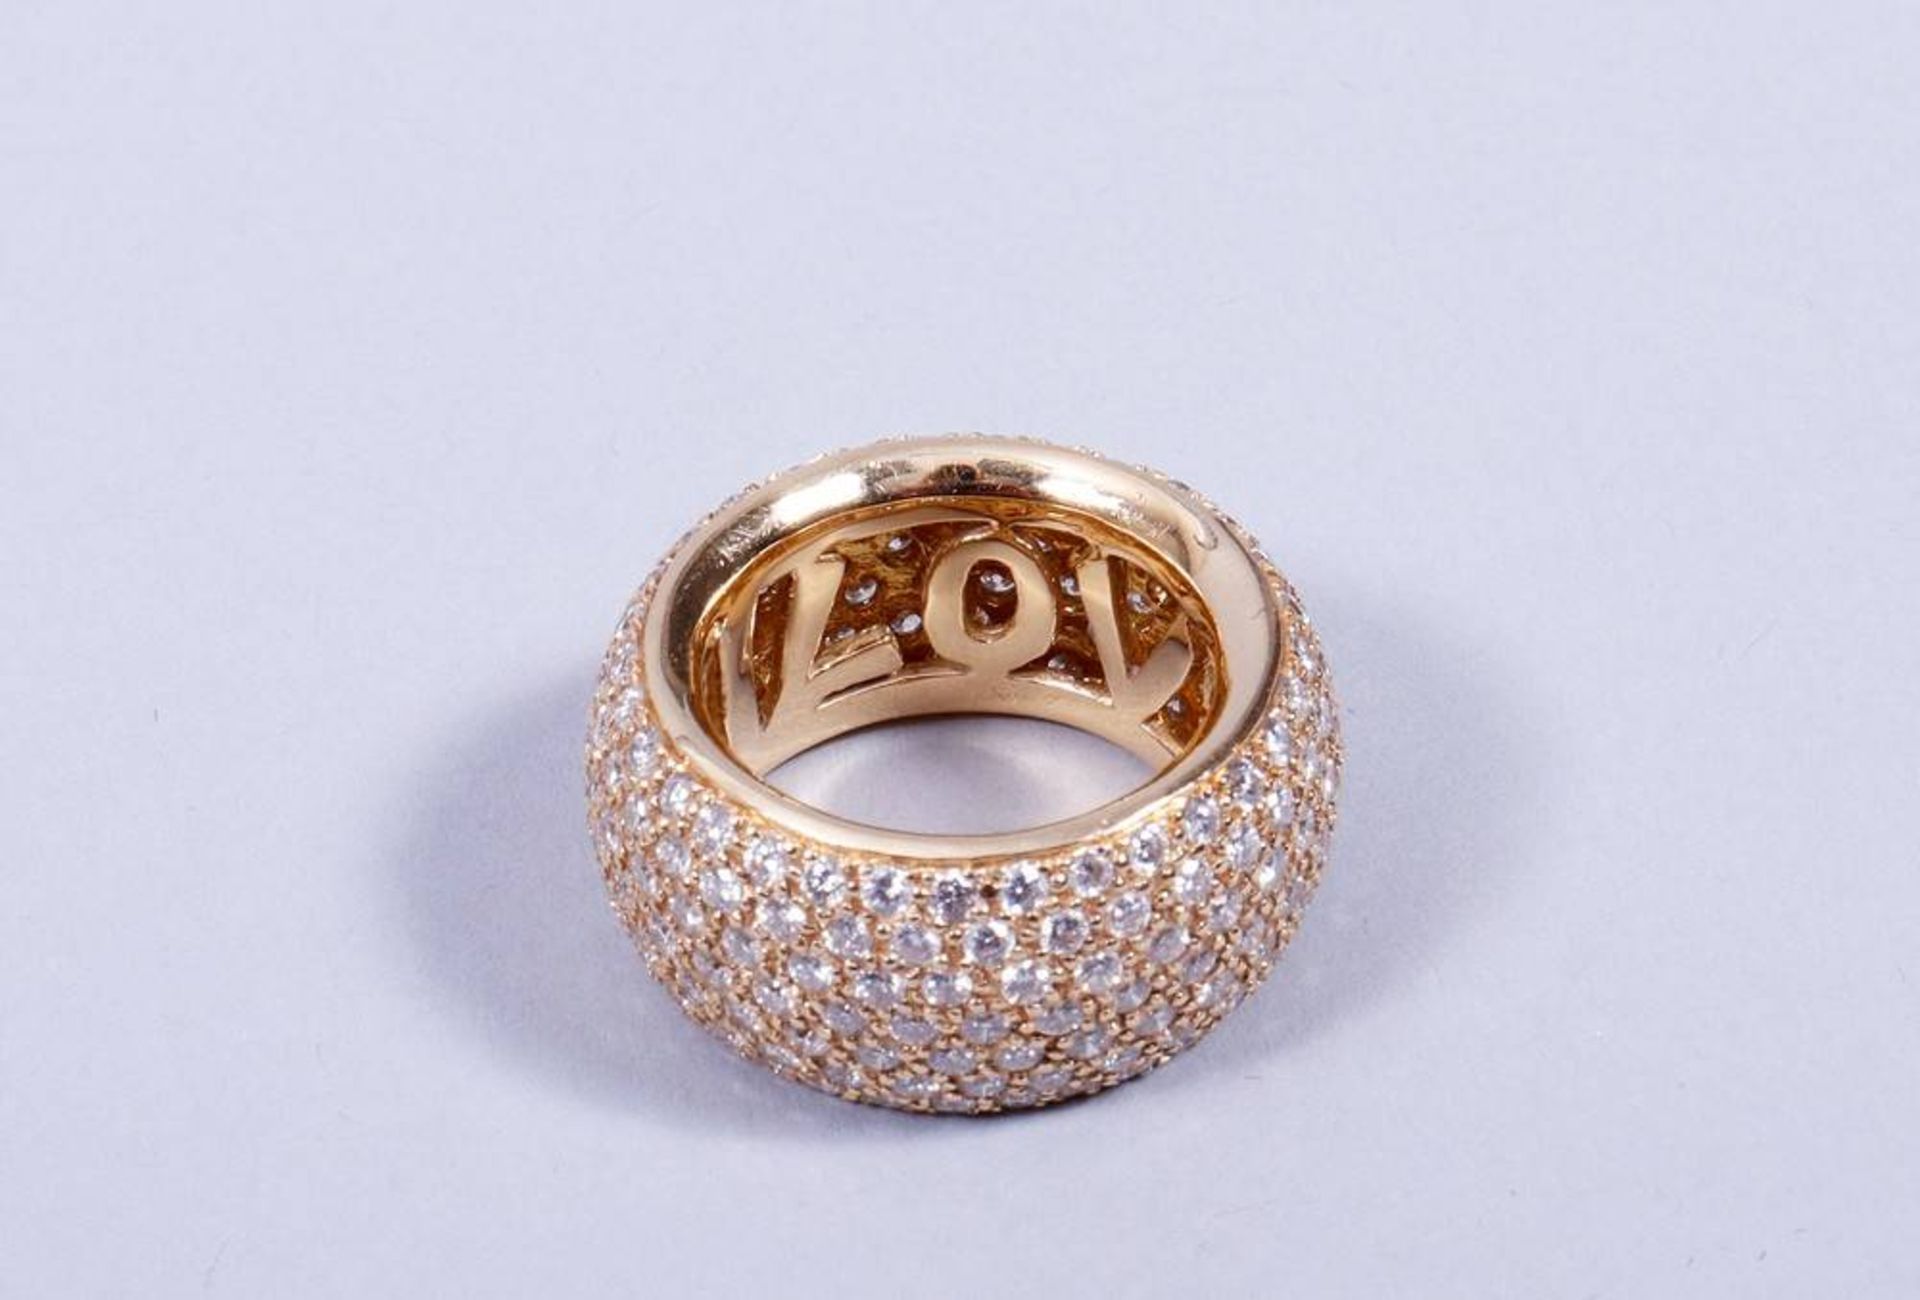 LOVE ring750 gold, Paul Buchwald (HPB), Frankfurt, pierced shank, forming the word "LOVE", arched